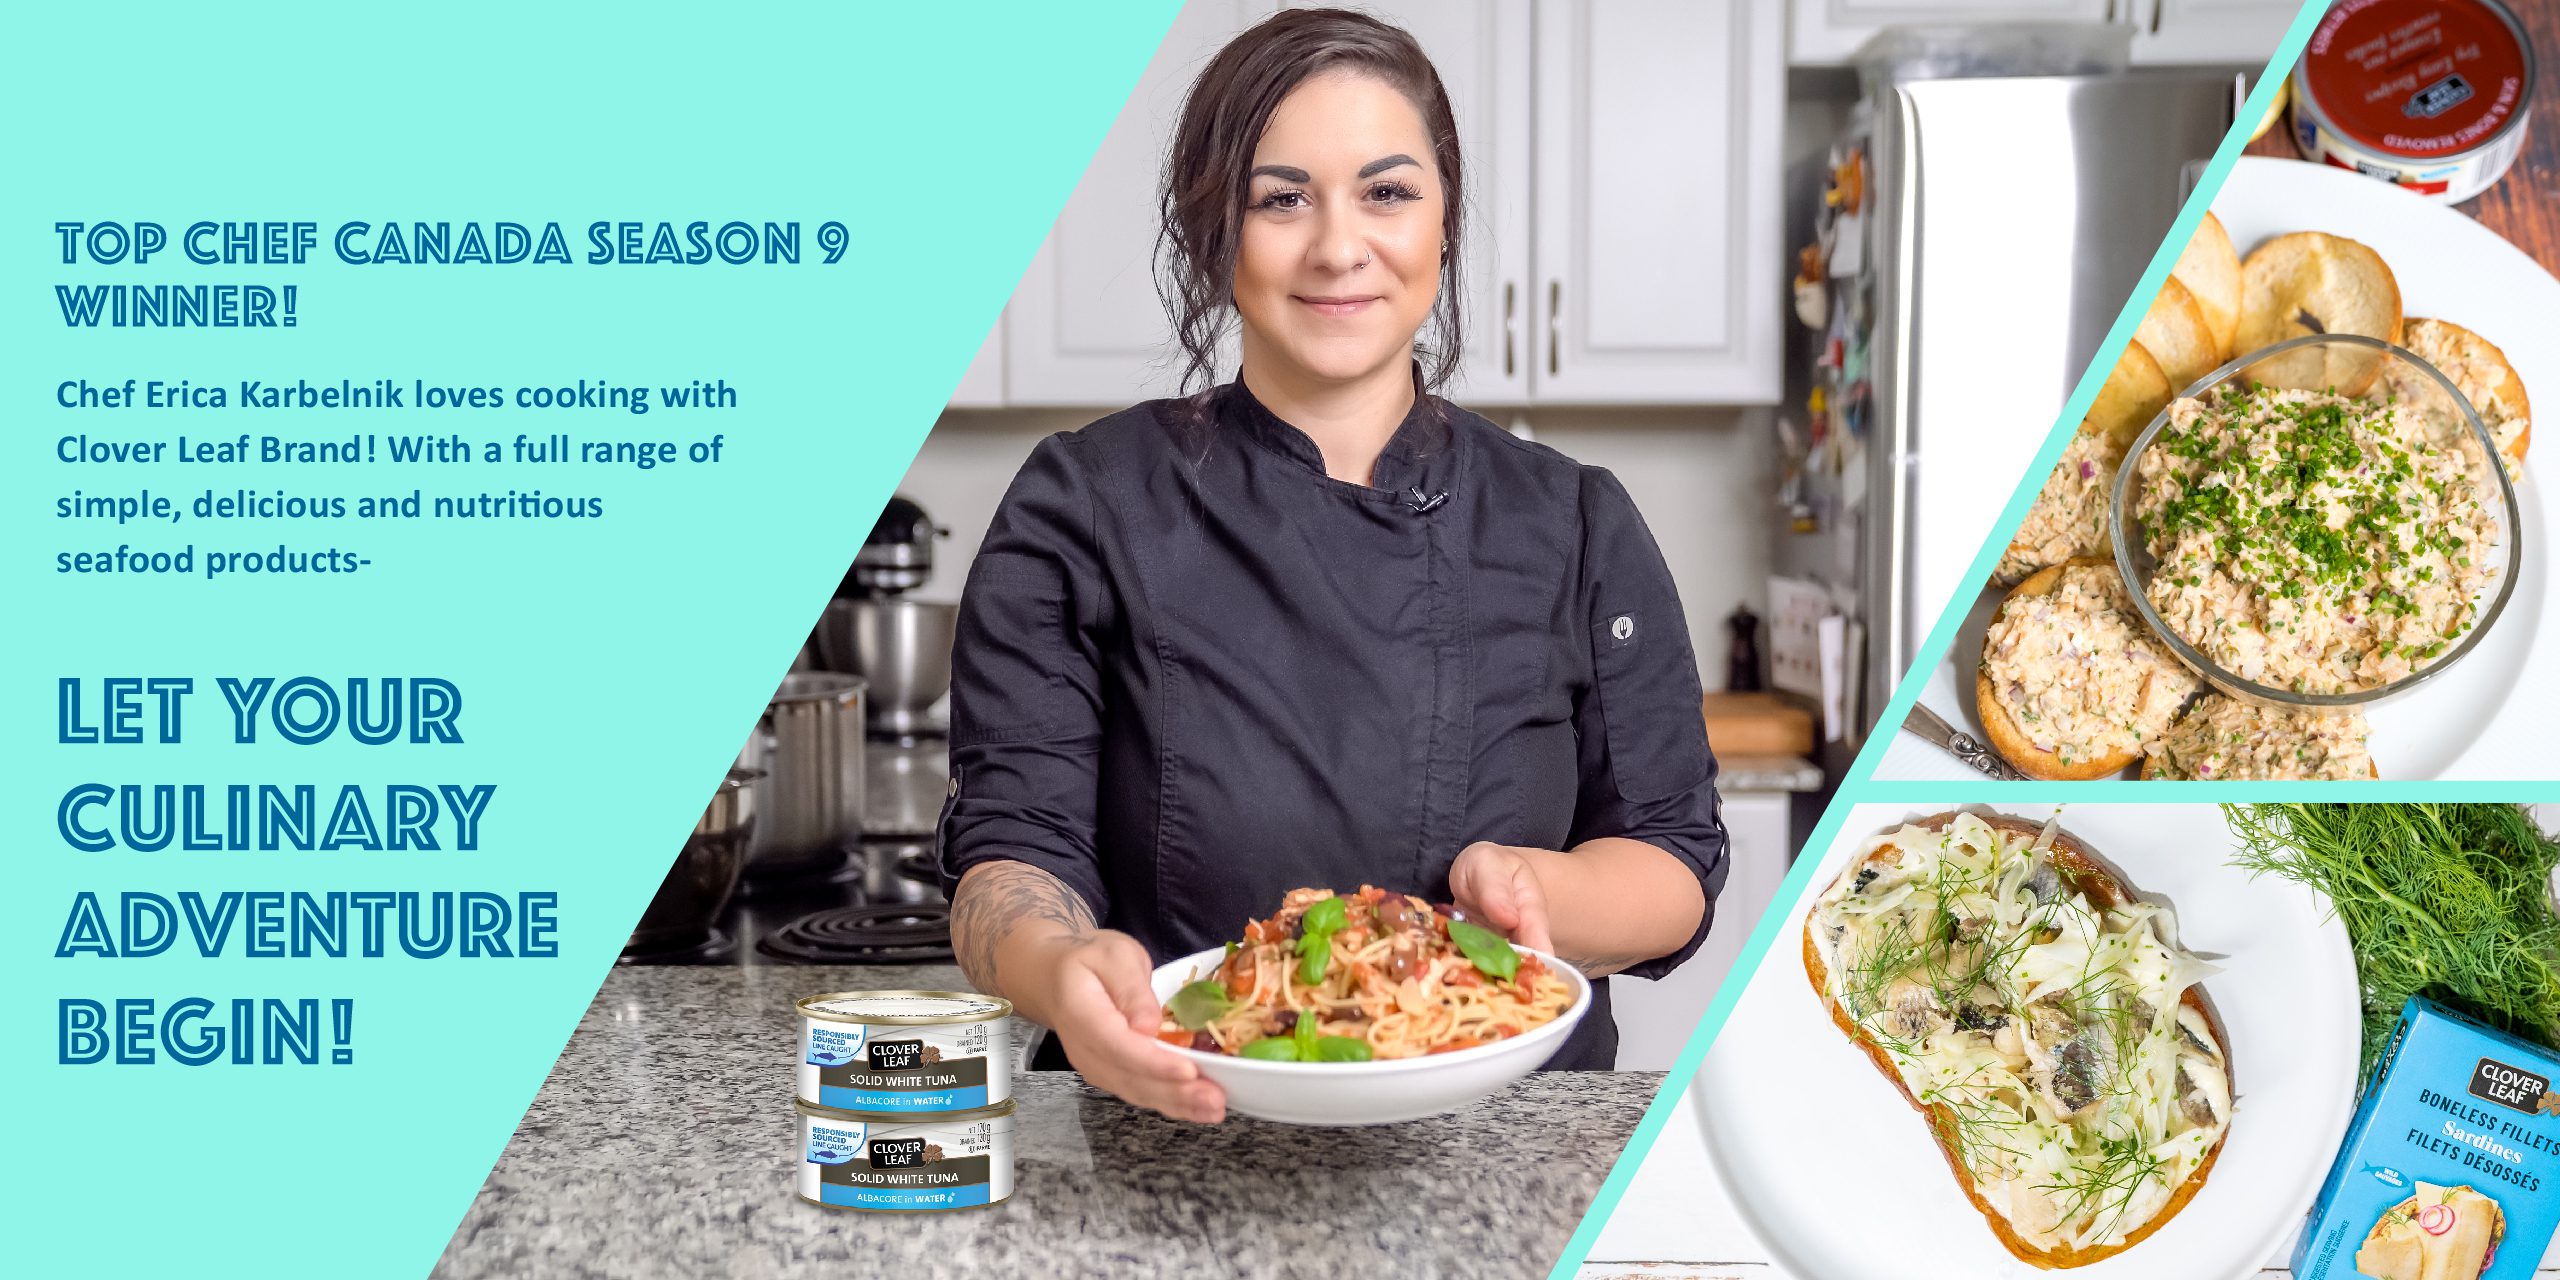 Top Chef Canada season 9 winner! Chef Erica Karbelnik loves cooking with Clover Leaf Brand! With a full range of simple, delicious and nutritious seafood products,  LET YOUR  CULINARY ADVENTURE  BEGIN!